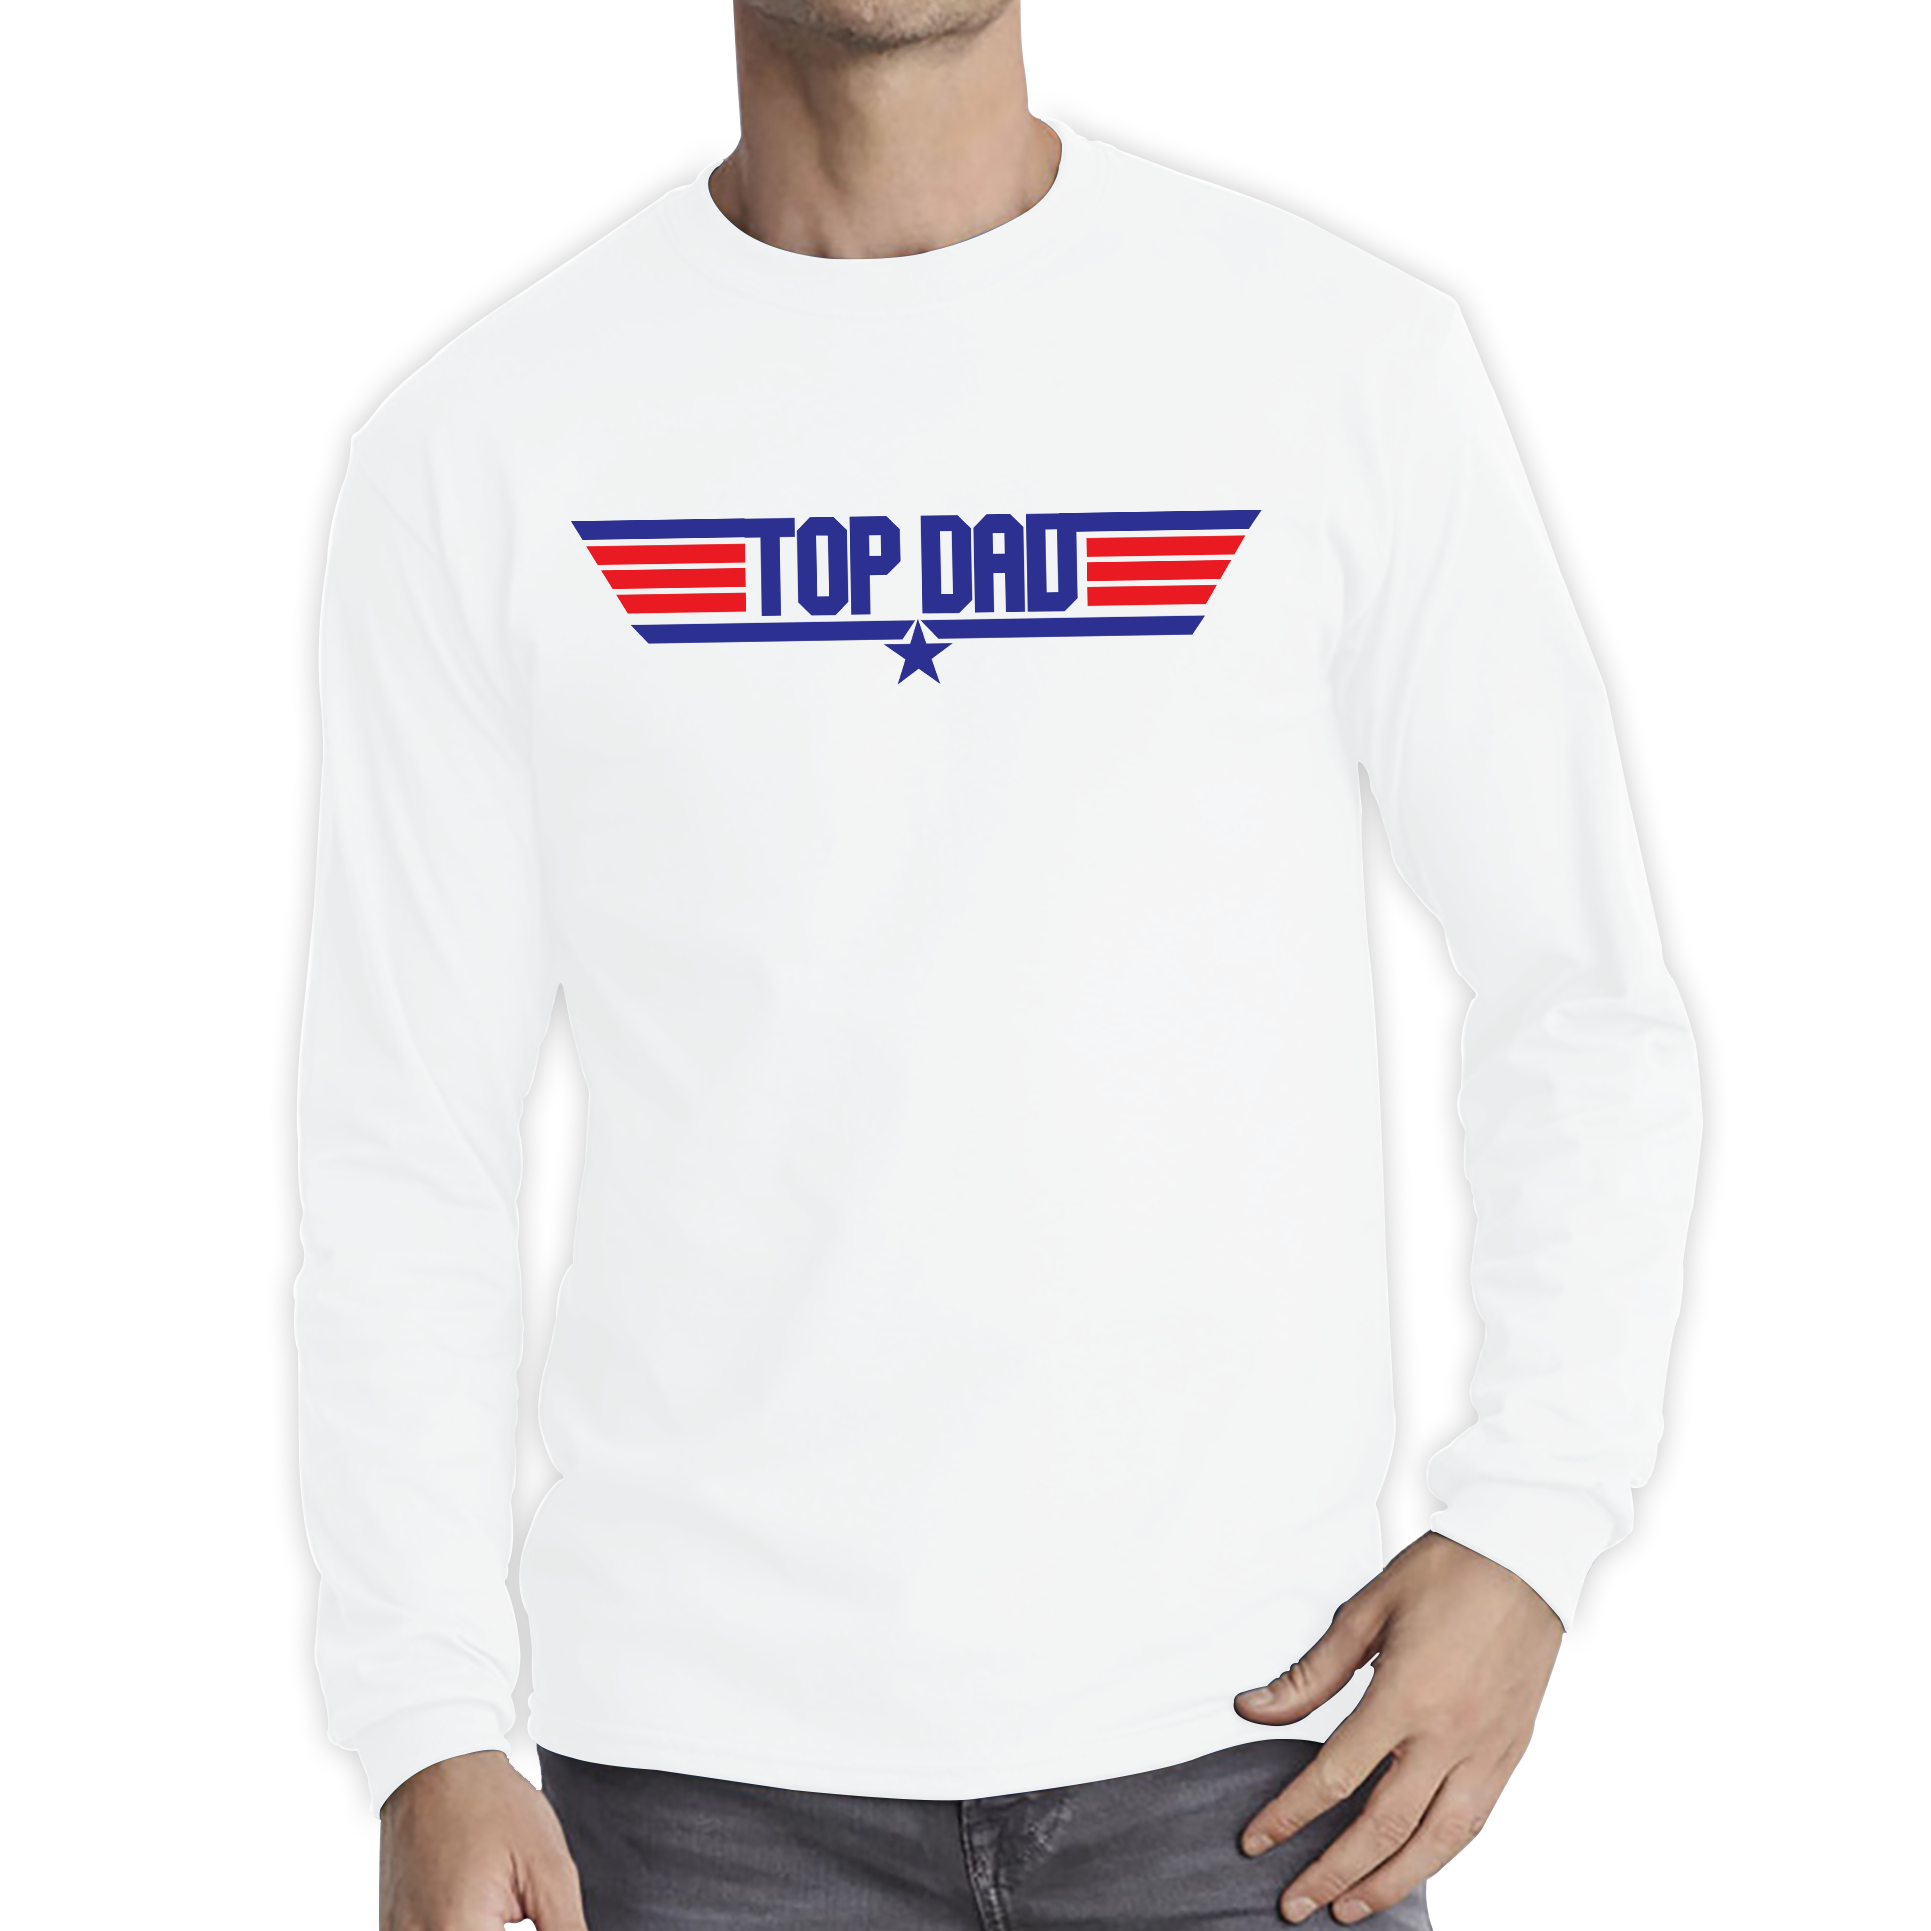 Top Dad Fathers Day Funny Top Gun Spoof Action Adventure Film Best Dad Gift For Father Long Sleeve T Shirt